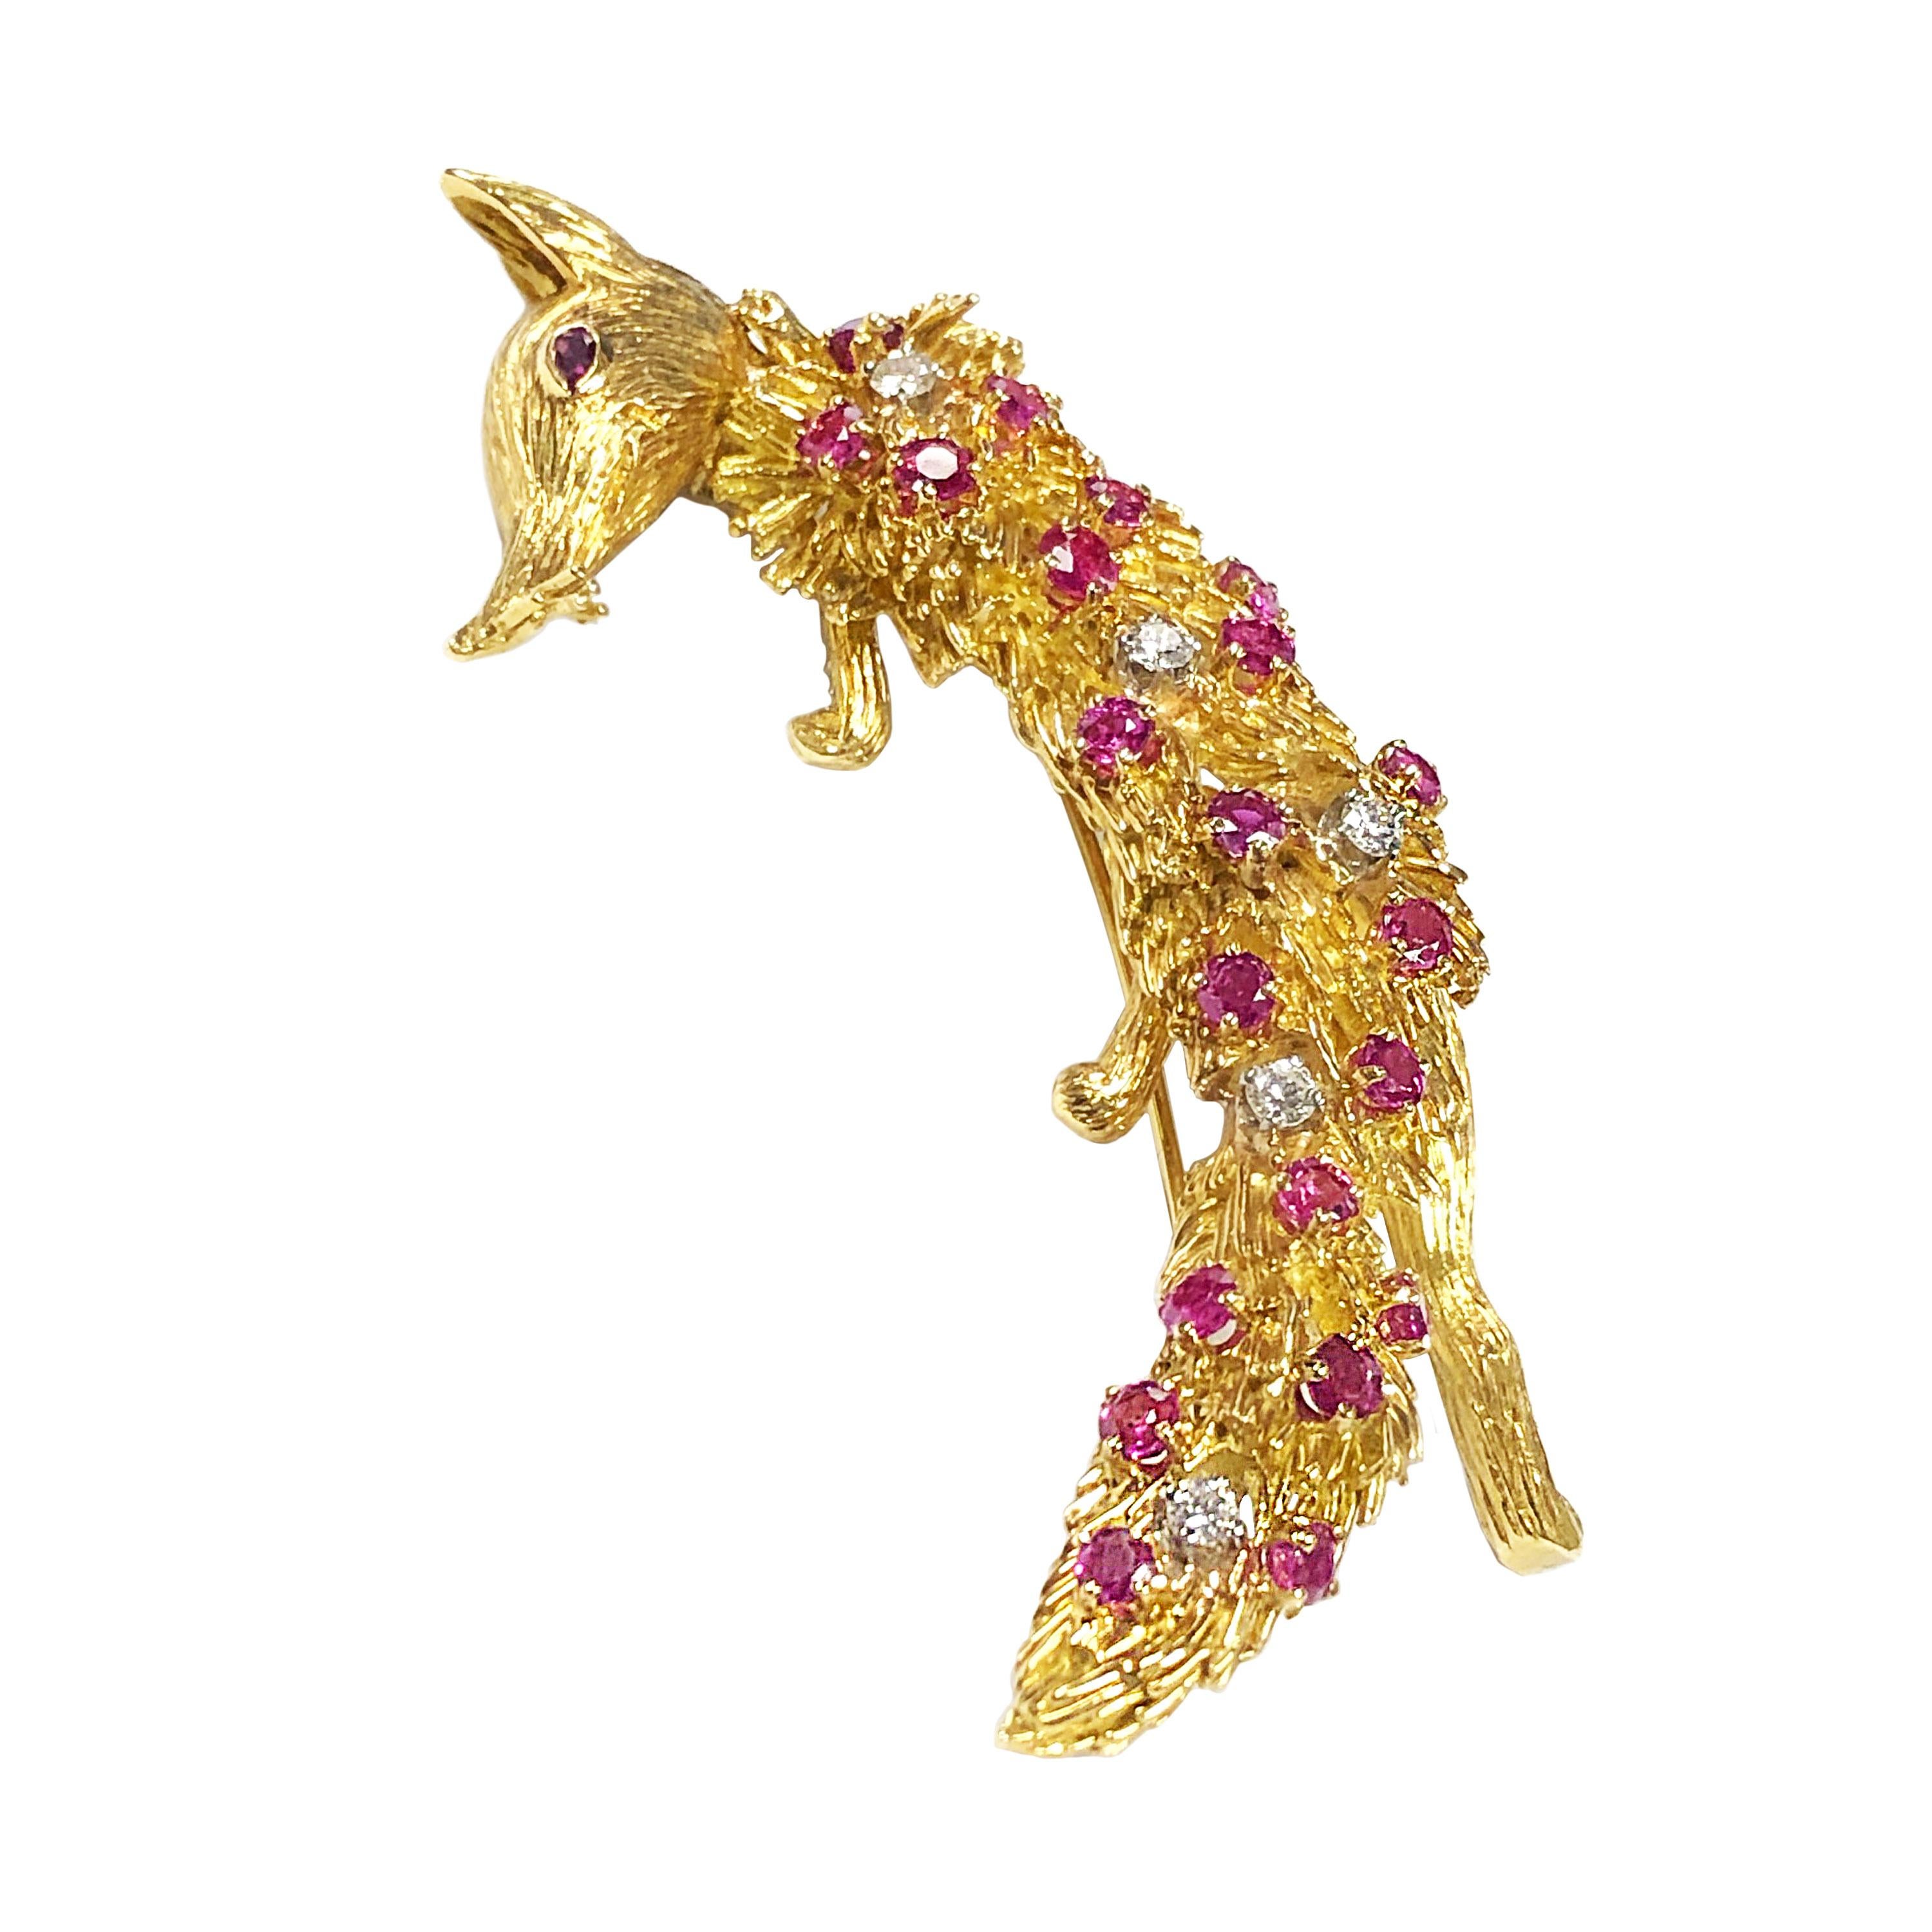 Circa 1980s Peter Linderman large and impressive 18K Yellow Gold Fox Brooch, very nicely made with fine details and set with Round Brilliant cut Diamonds totaling 1/2 carat and Very fine color Rubies totaling approximately 1 carat.  Measuring 3